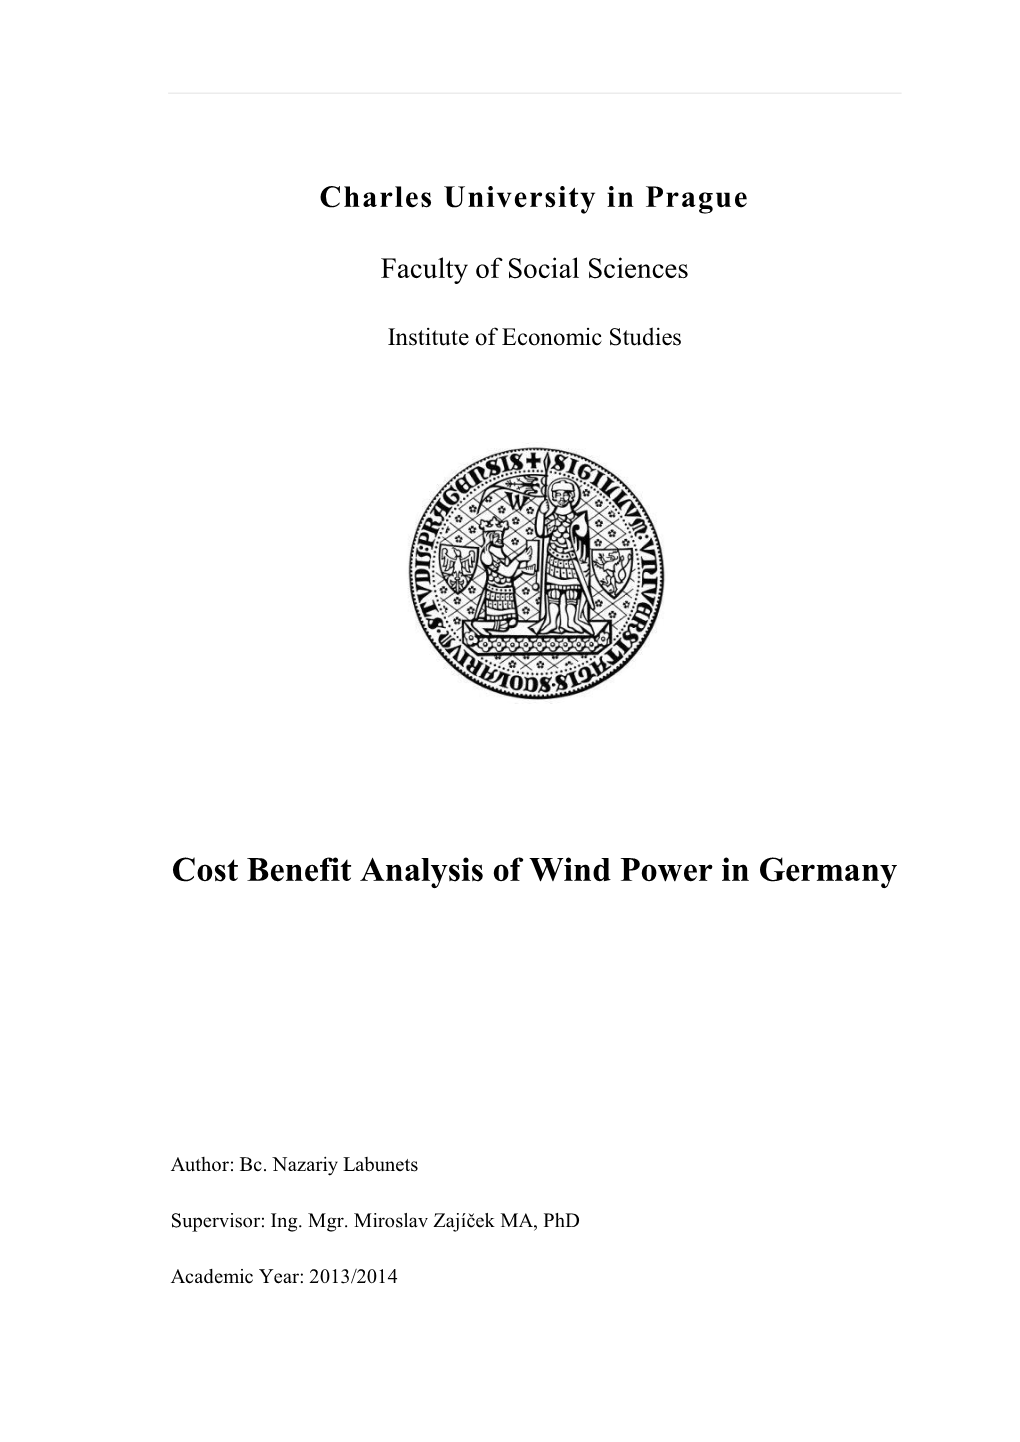 Cost Benefit Analysis of Wind Power in Germany